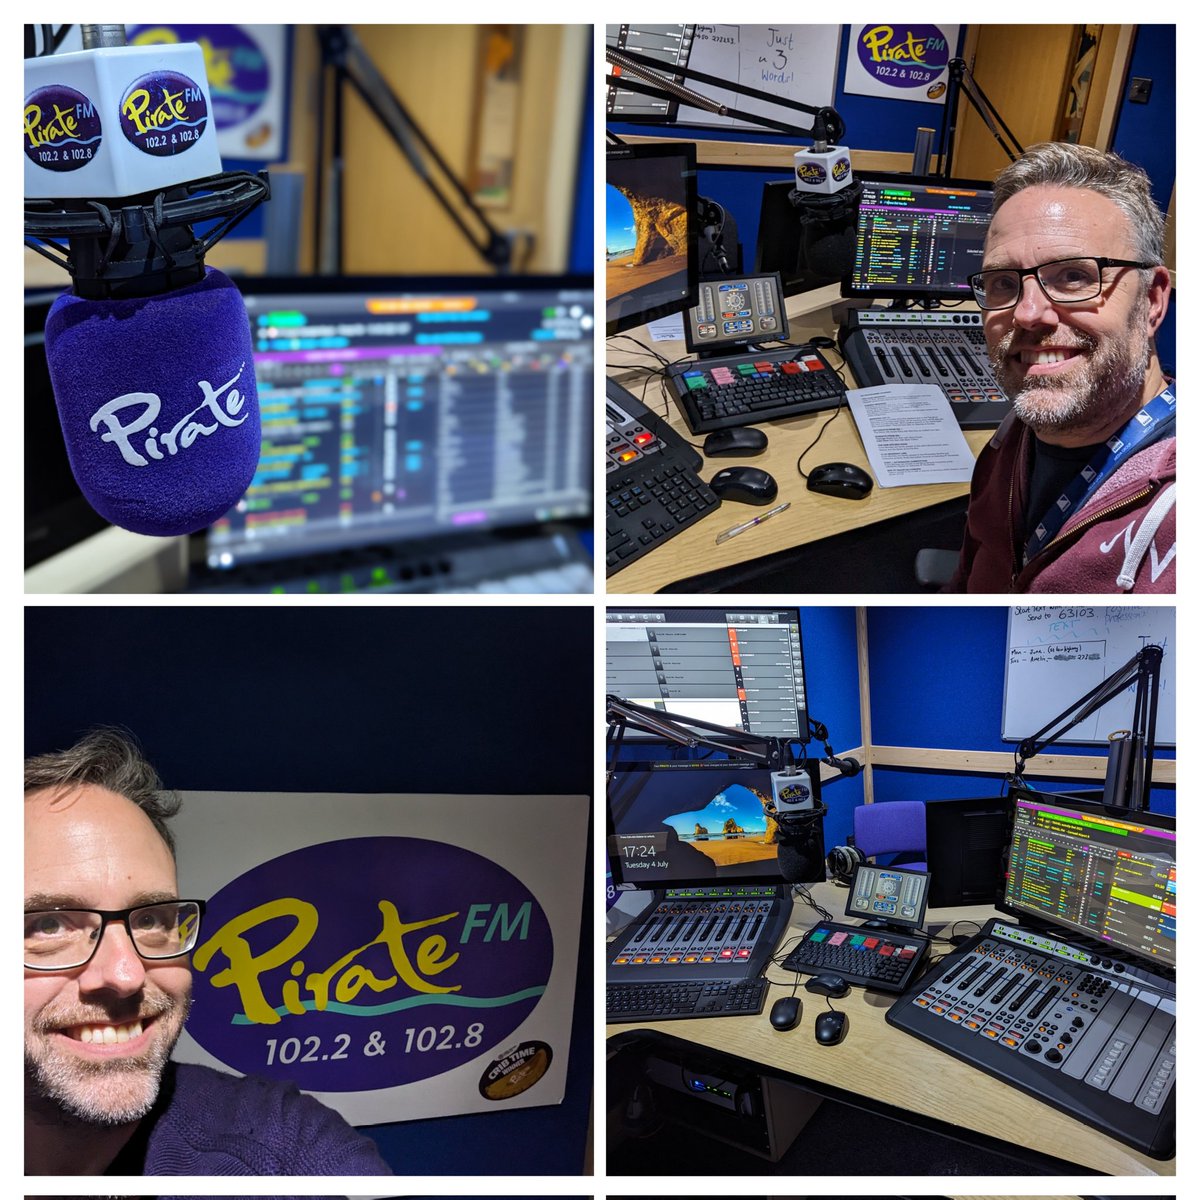 Next week marks 25 years since I started at @wave105radio and I'm excited to share the news that I've been offered my first weekend on-air shifts at our sister station, @PirateFM. I'll be waking up #Cornwall from 6-8am on the early weekend breakfast on Saturday and Sunday. ⏰📻